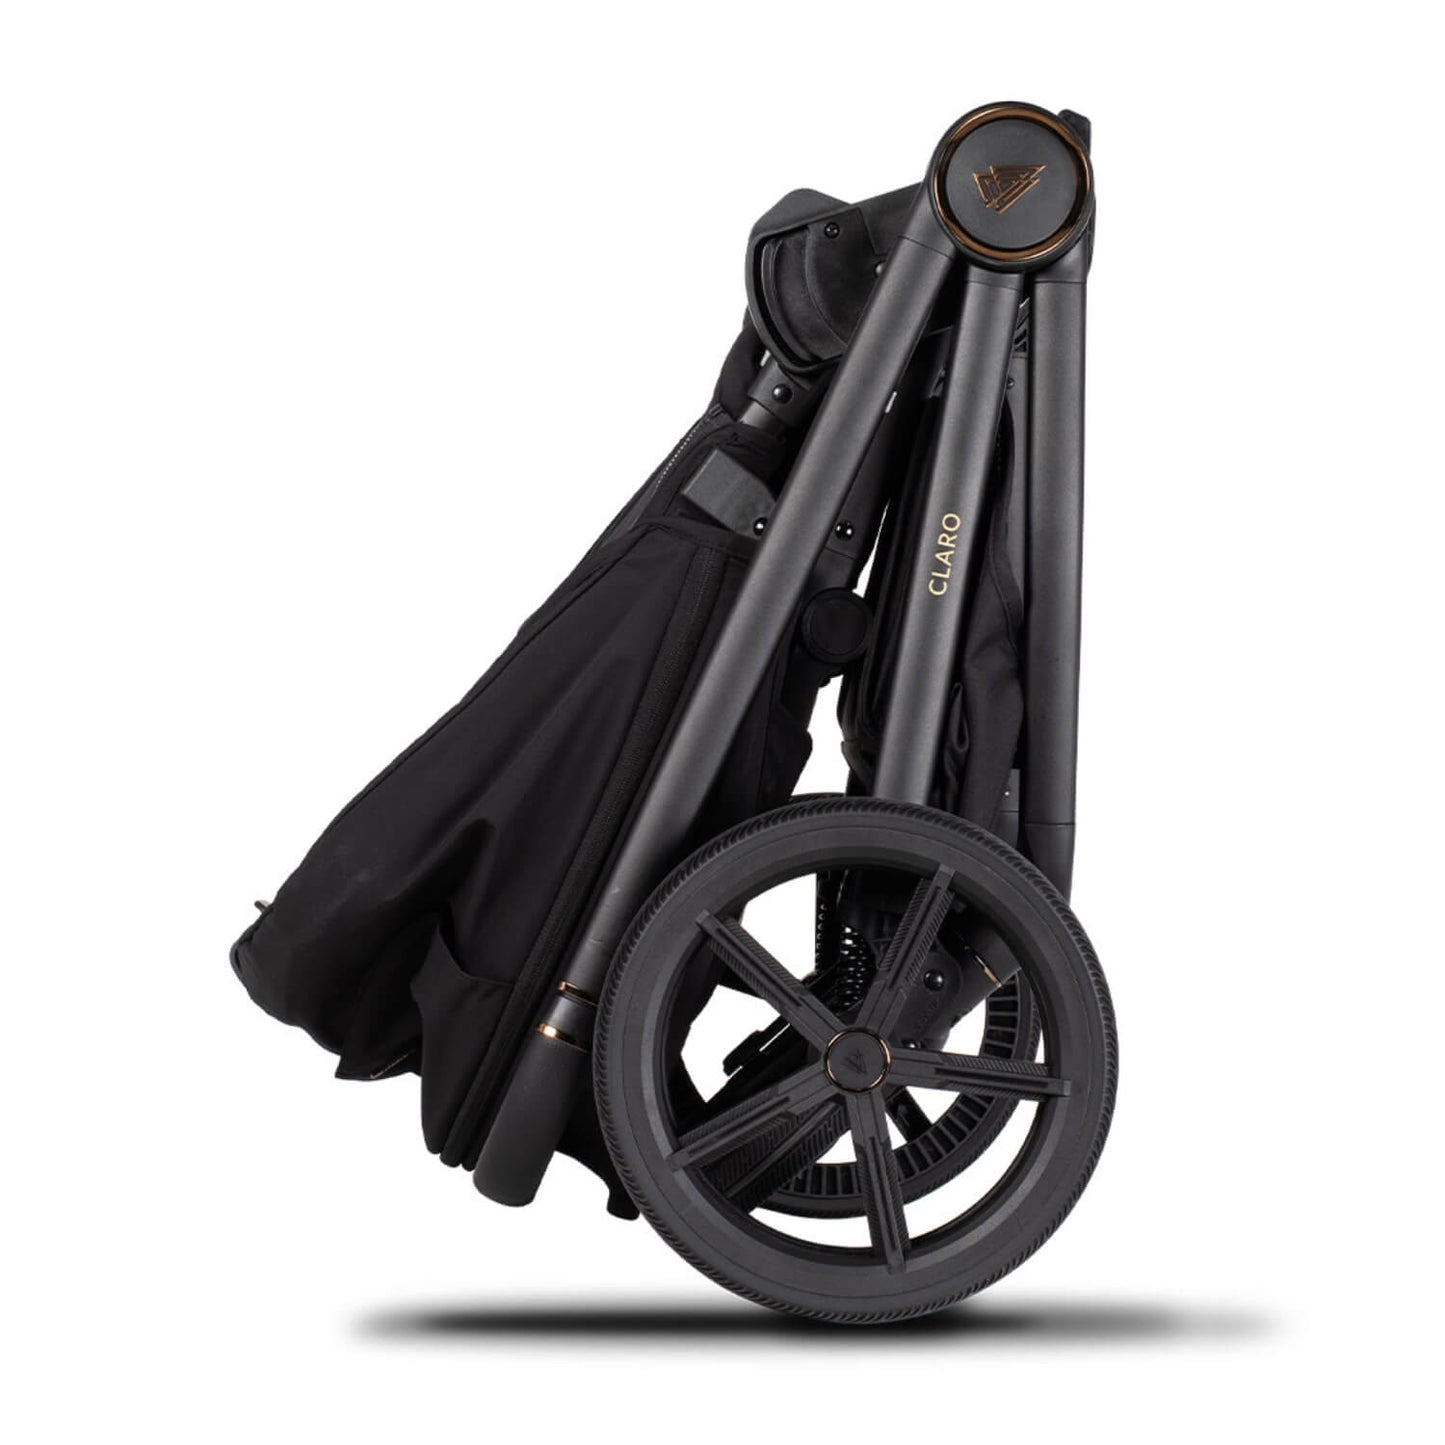 Side view of folded Venicci Claro pushchair seat in Noir black colour